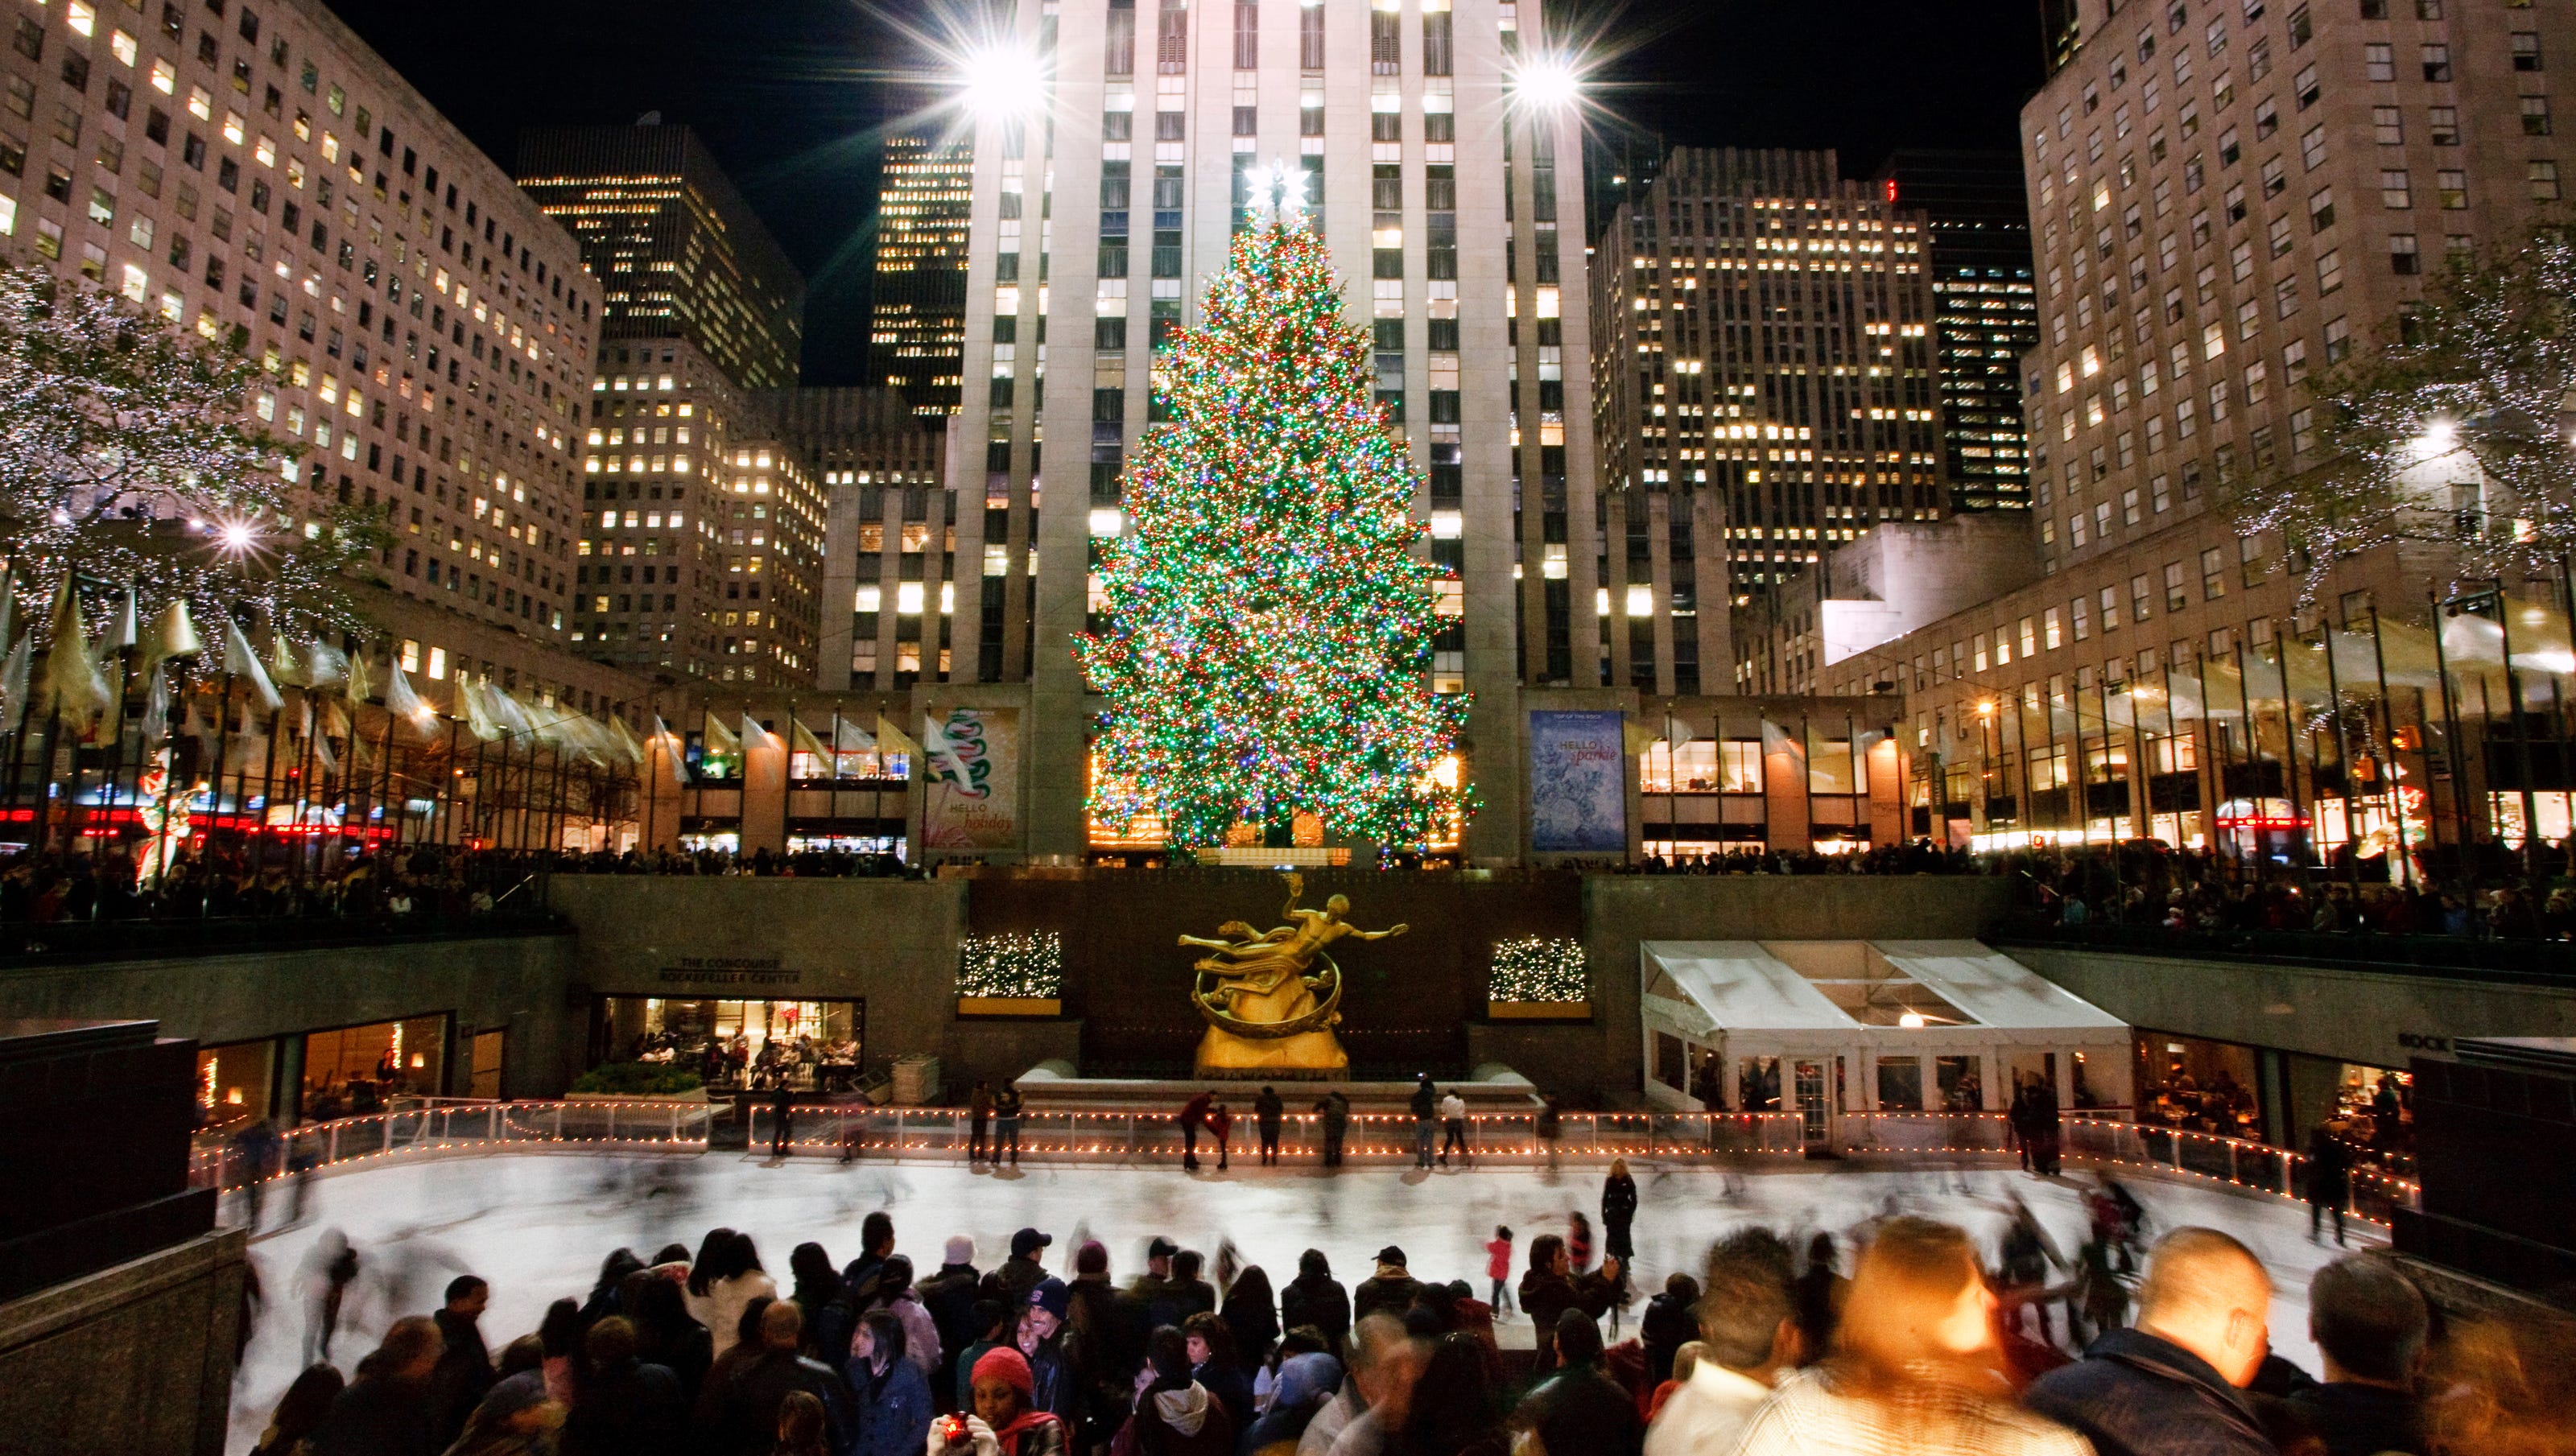 10Best: Places to see holiday lights in NYC